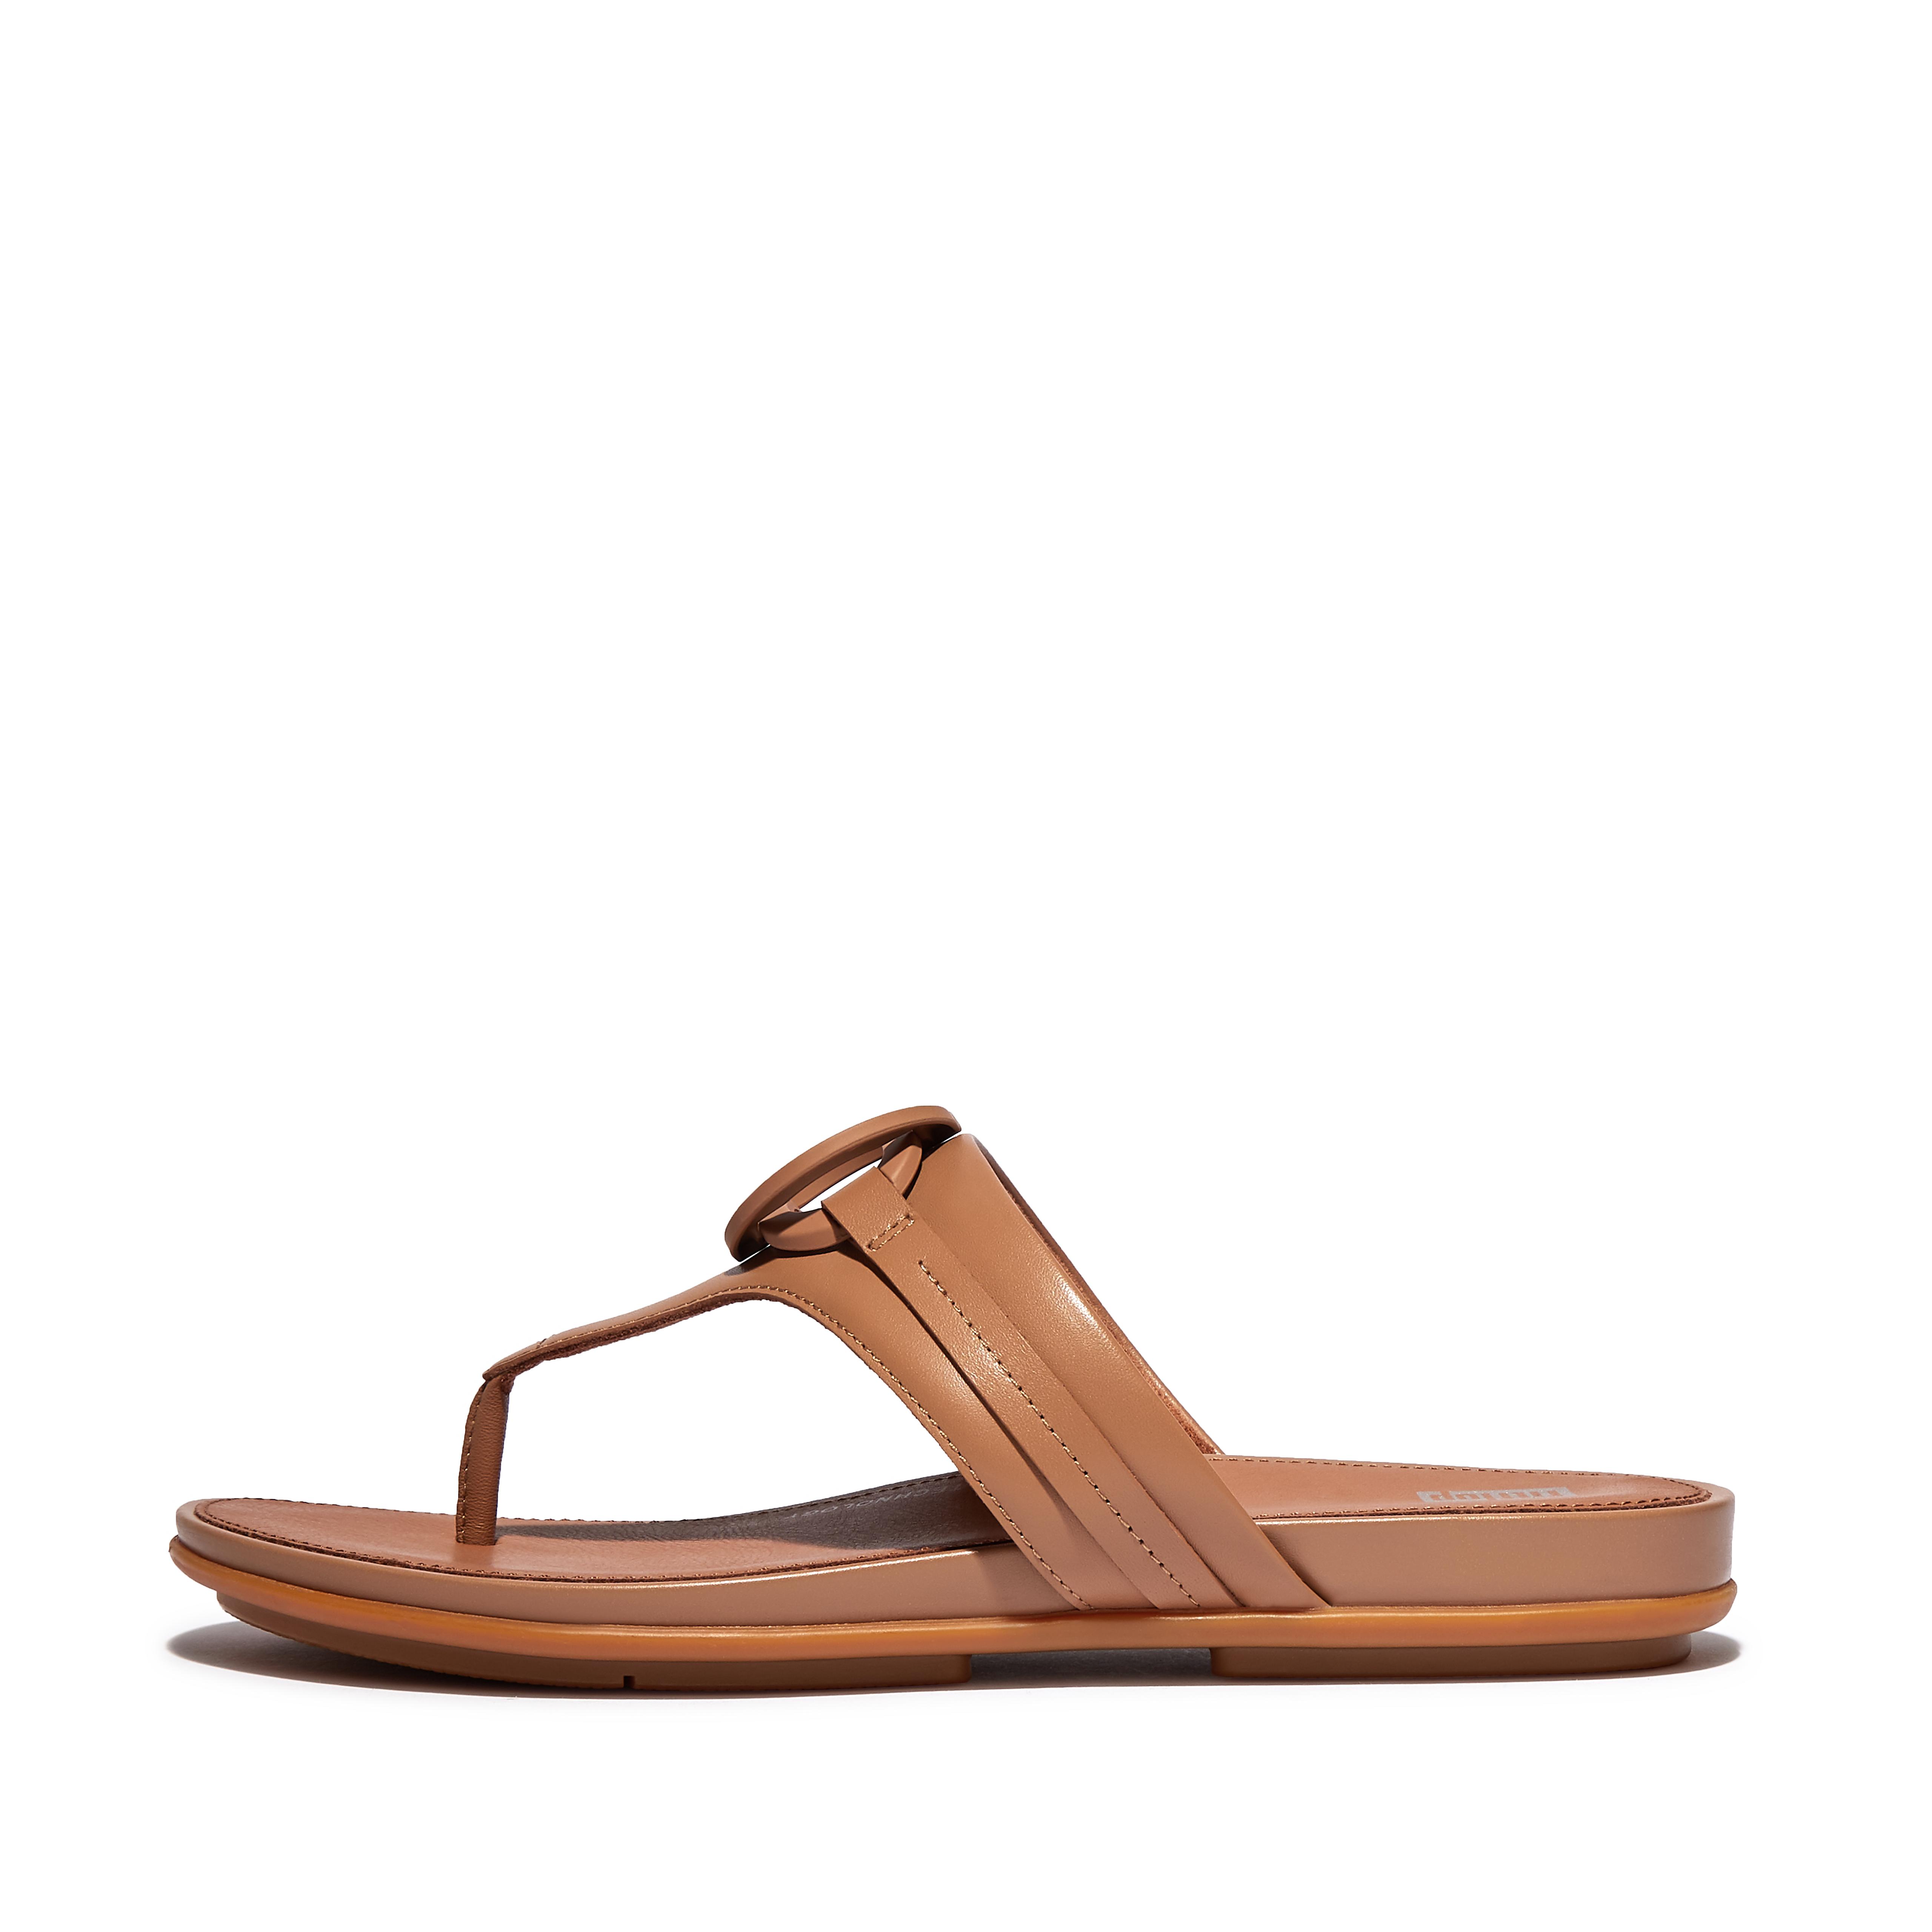 Women's Gracie Leather Toe-Post Sandals | FitFlop UK